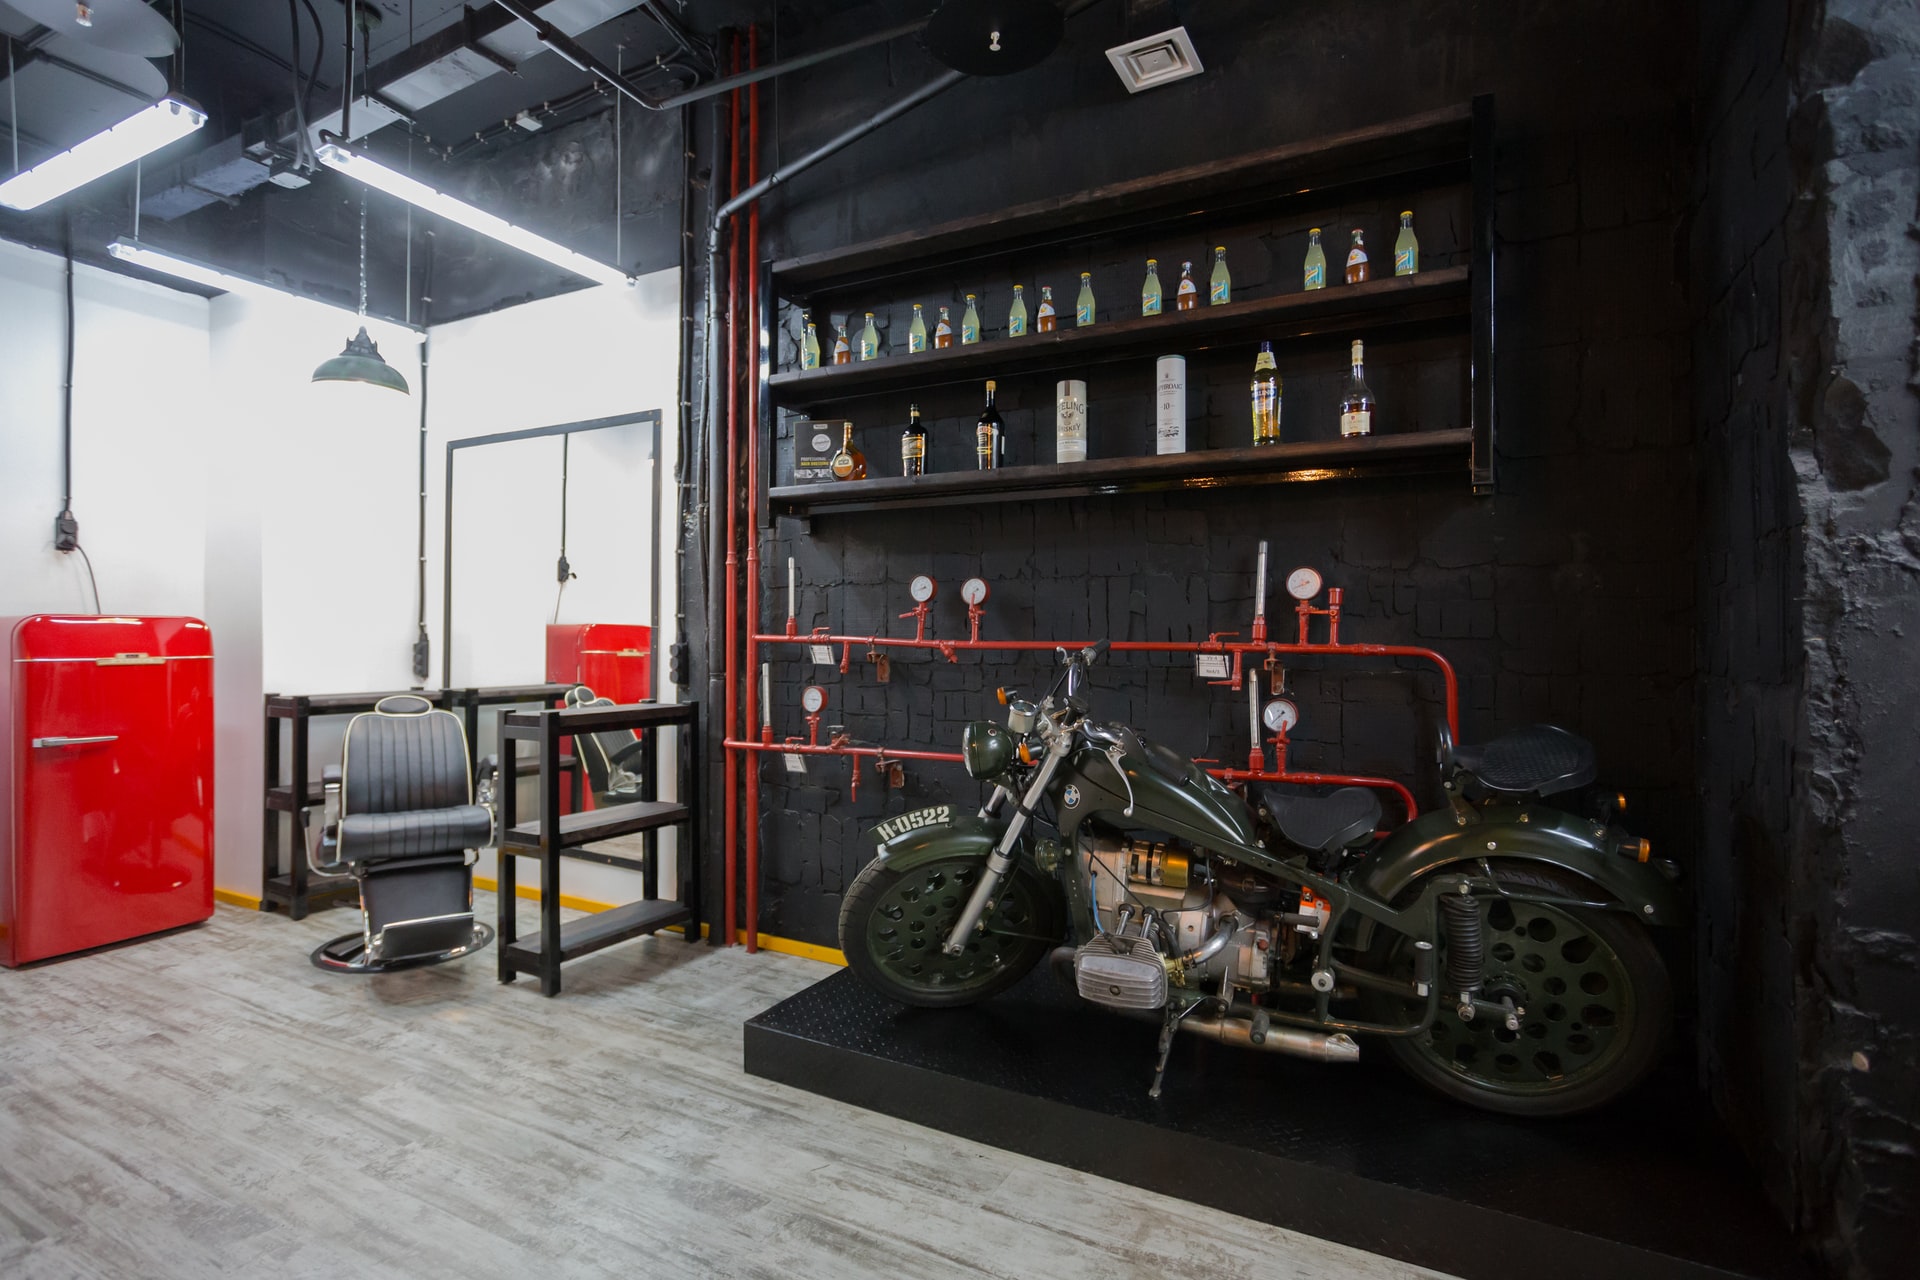 Motorcycle being held in a sterile room with a black wall and red room accents